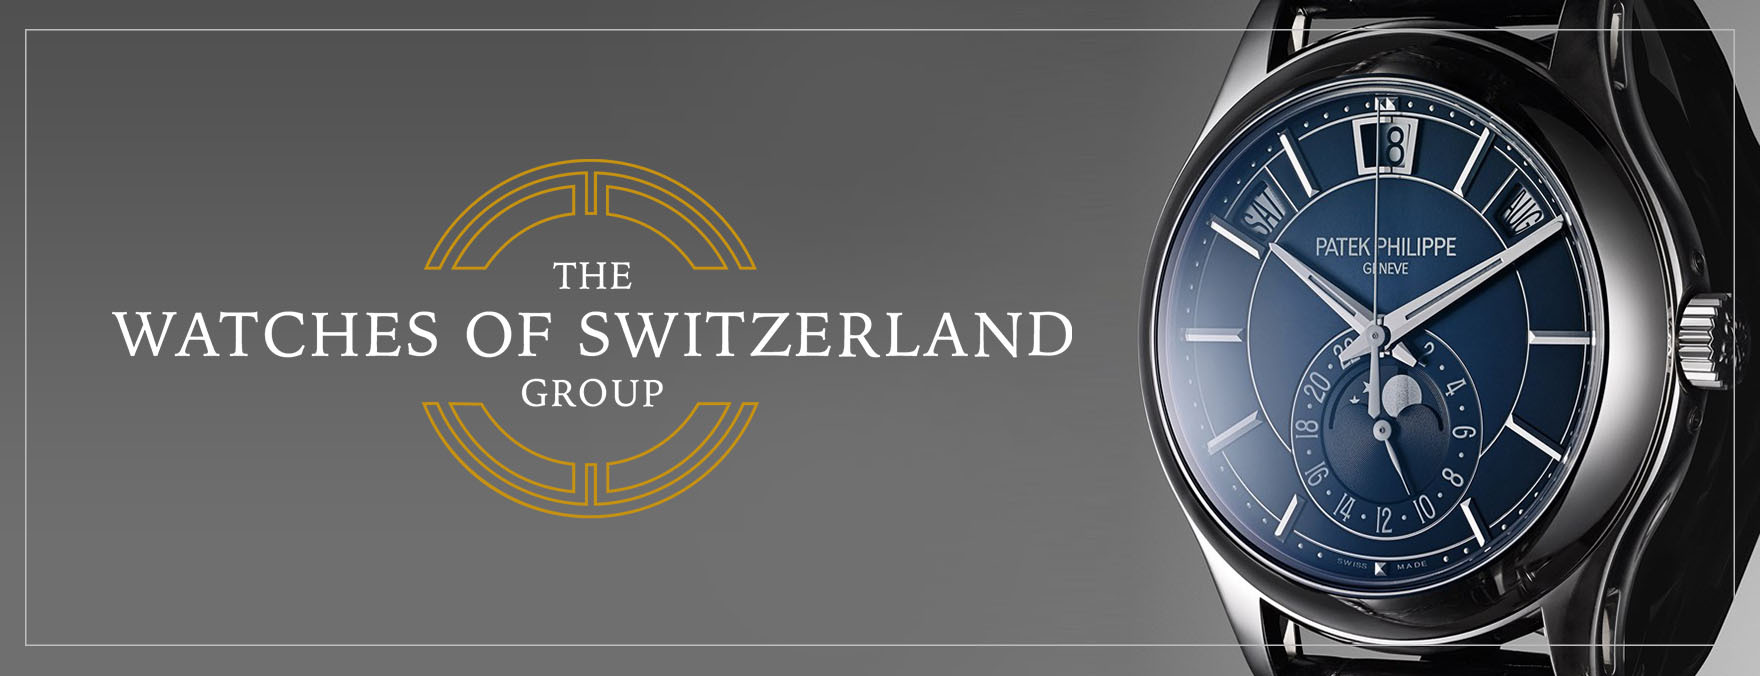  On the right of the grey background image is a magnificent watch - a product of the Watched of Switzerland Group - and on the left is the company's emblem.